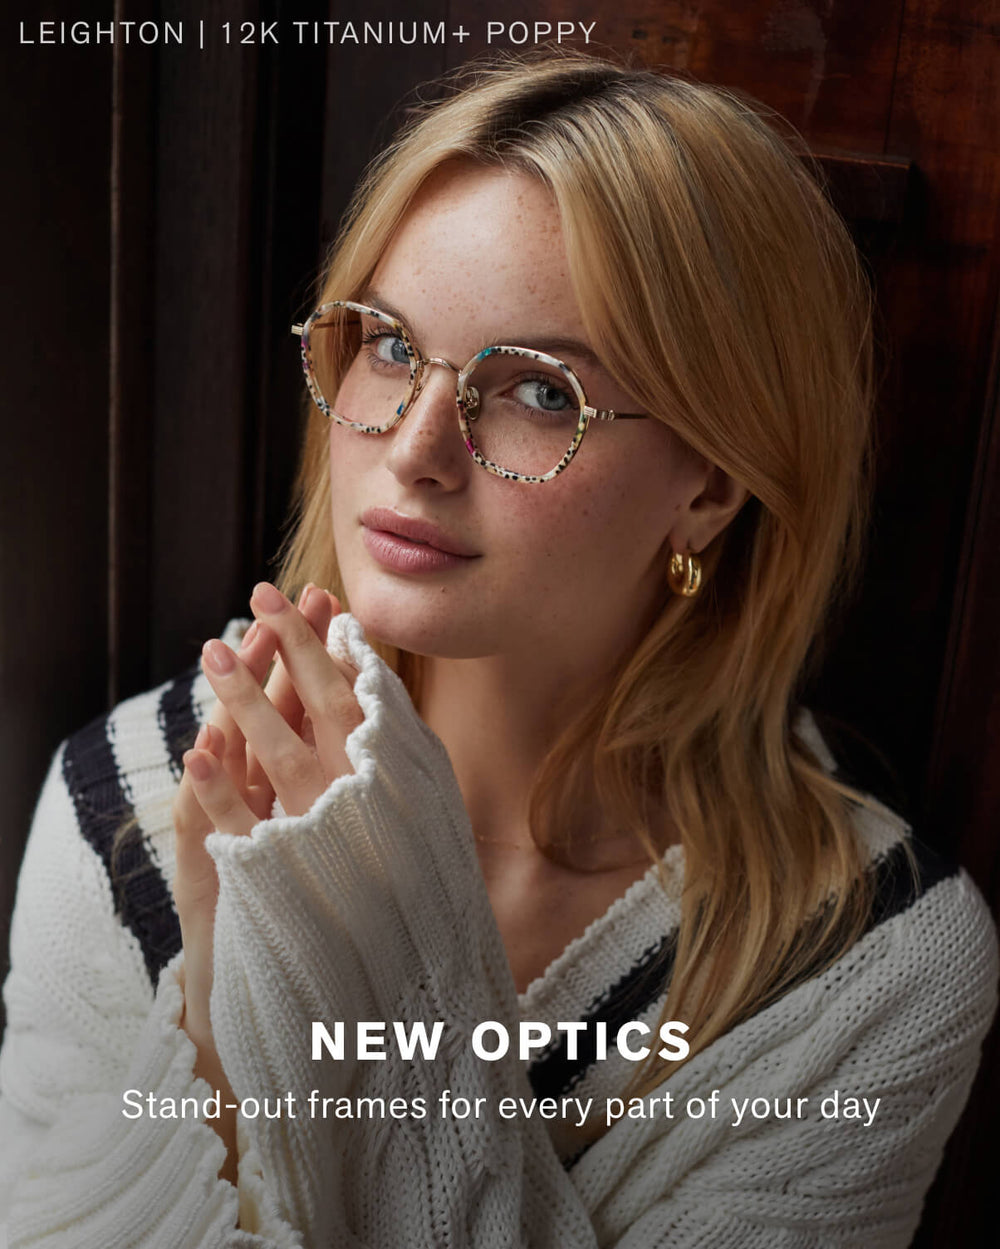 New Optics. Stand out frames for every part of your day